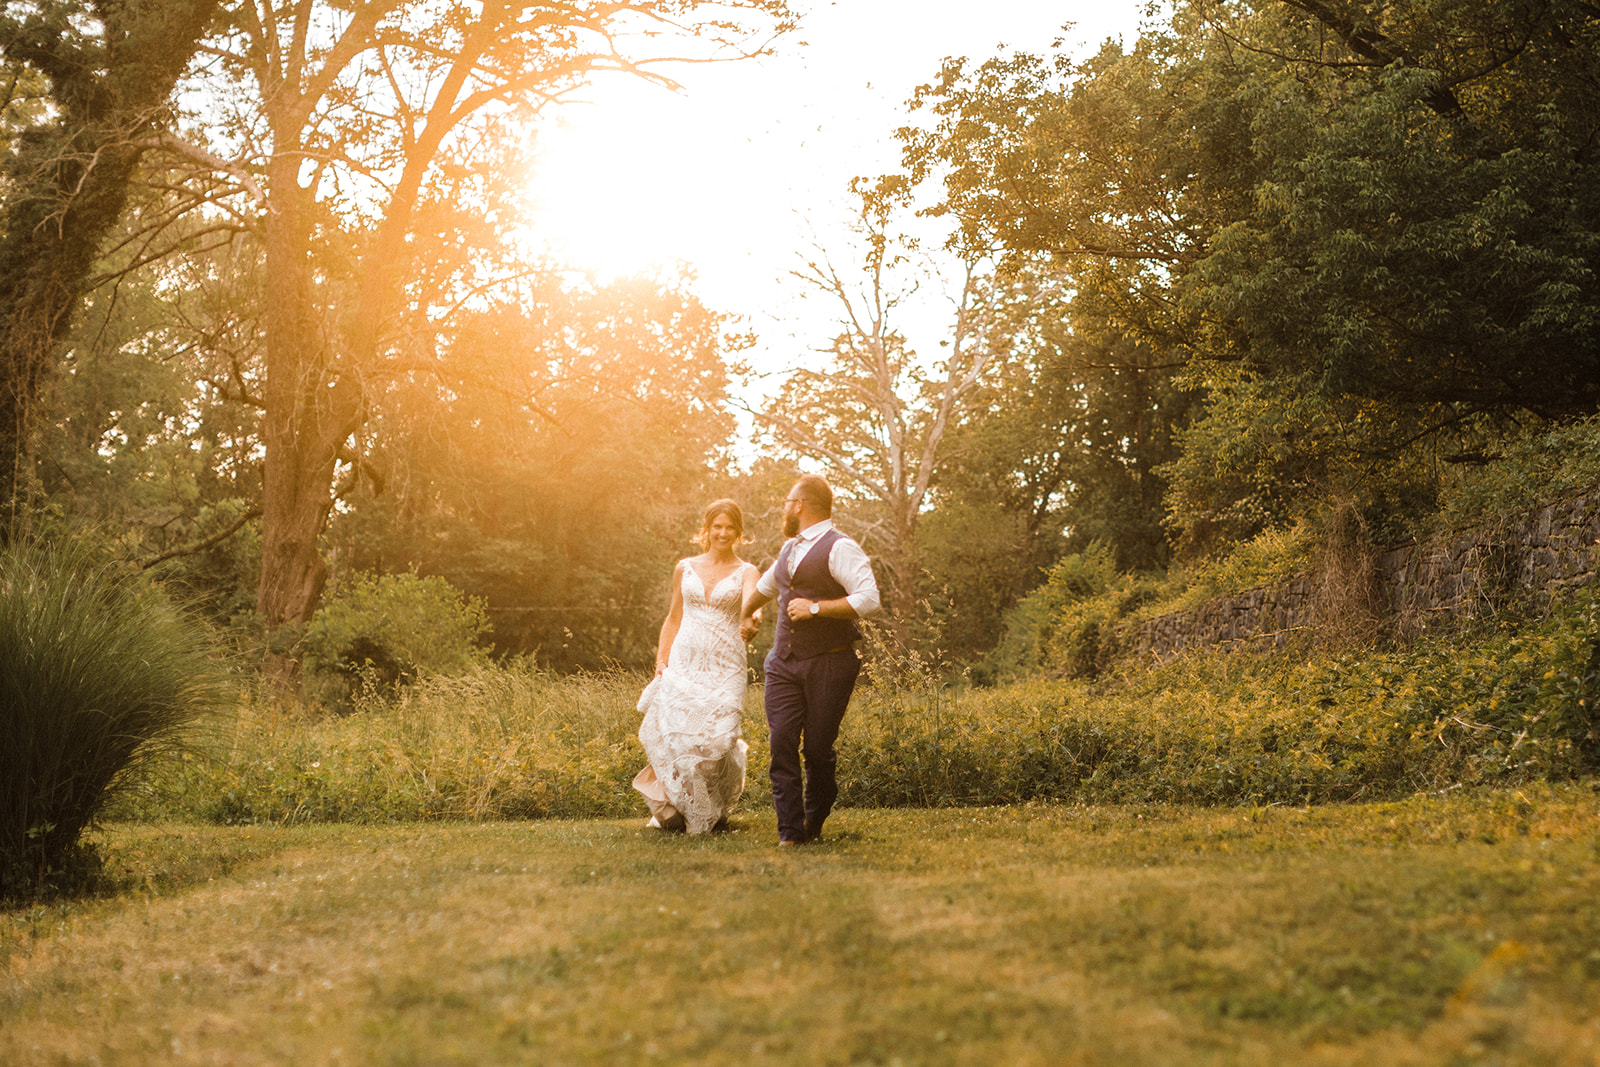 Rustic Barn Wedding in Chester County, PA